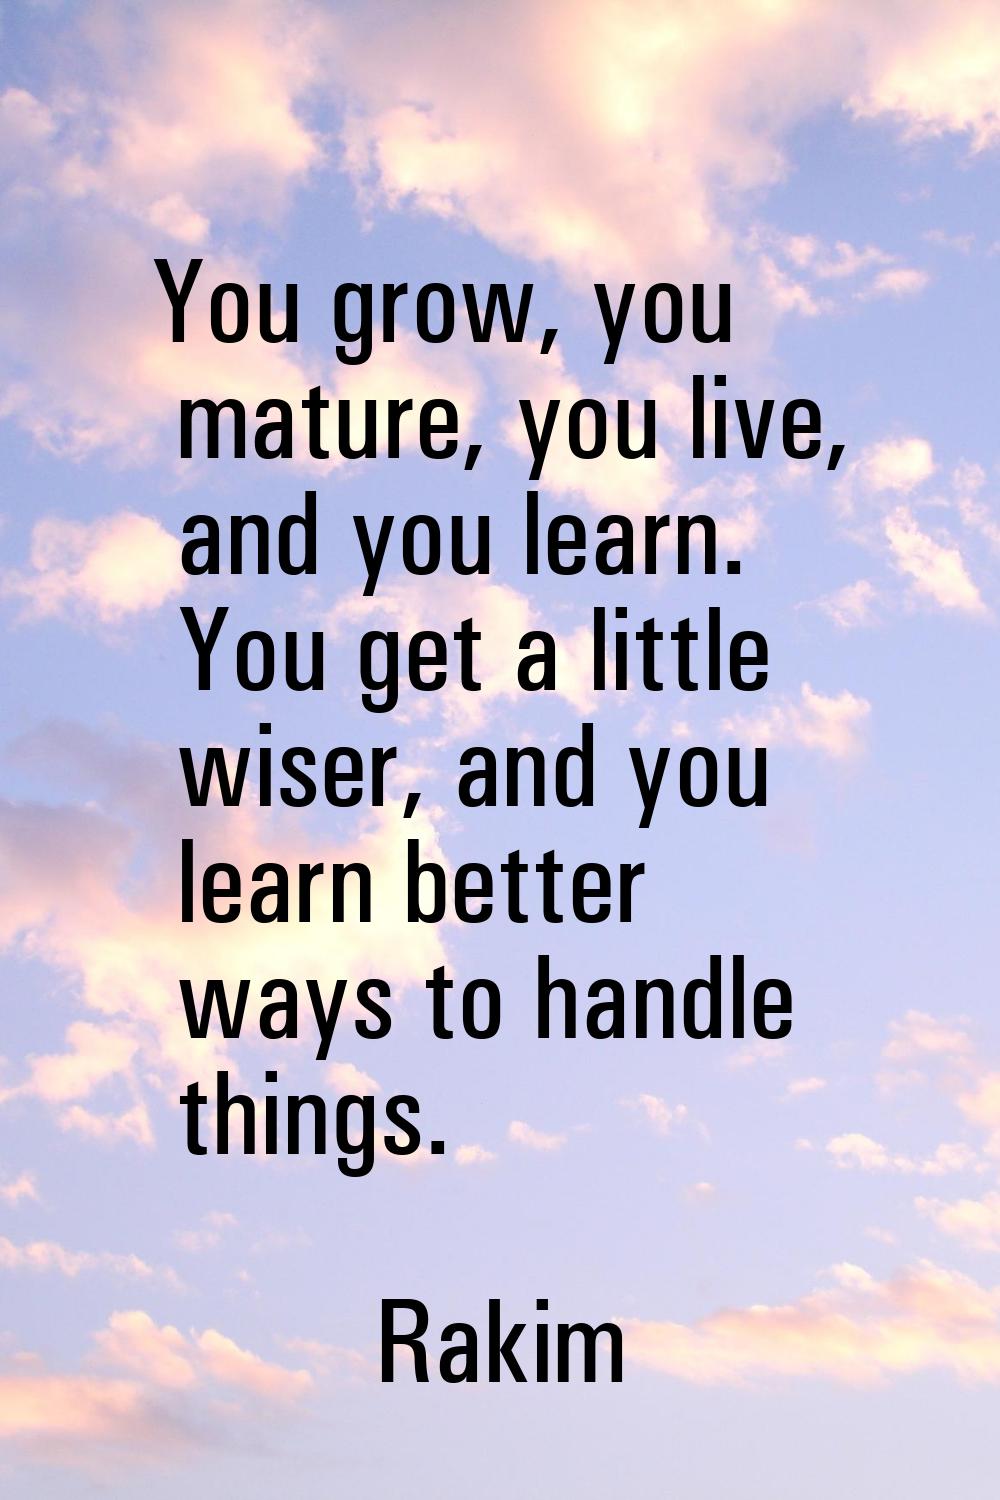 You grow, you mature, you live, and you learn. You get a little wiser, and you learn better ways to